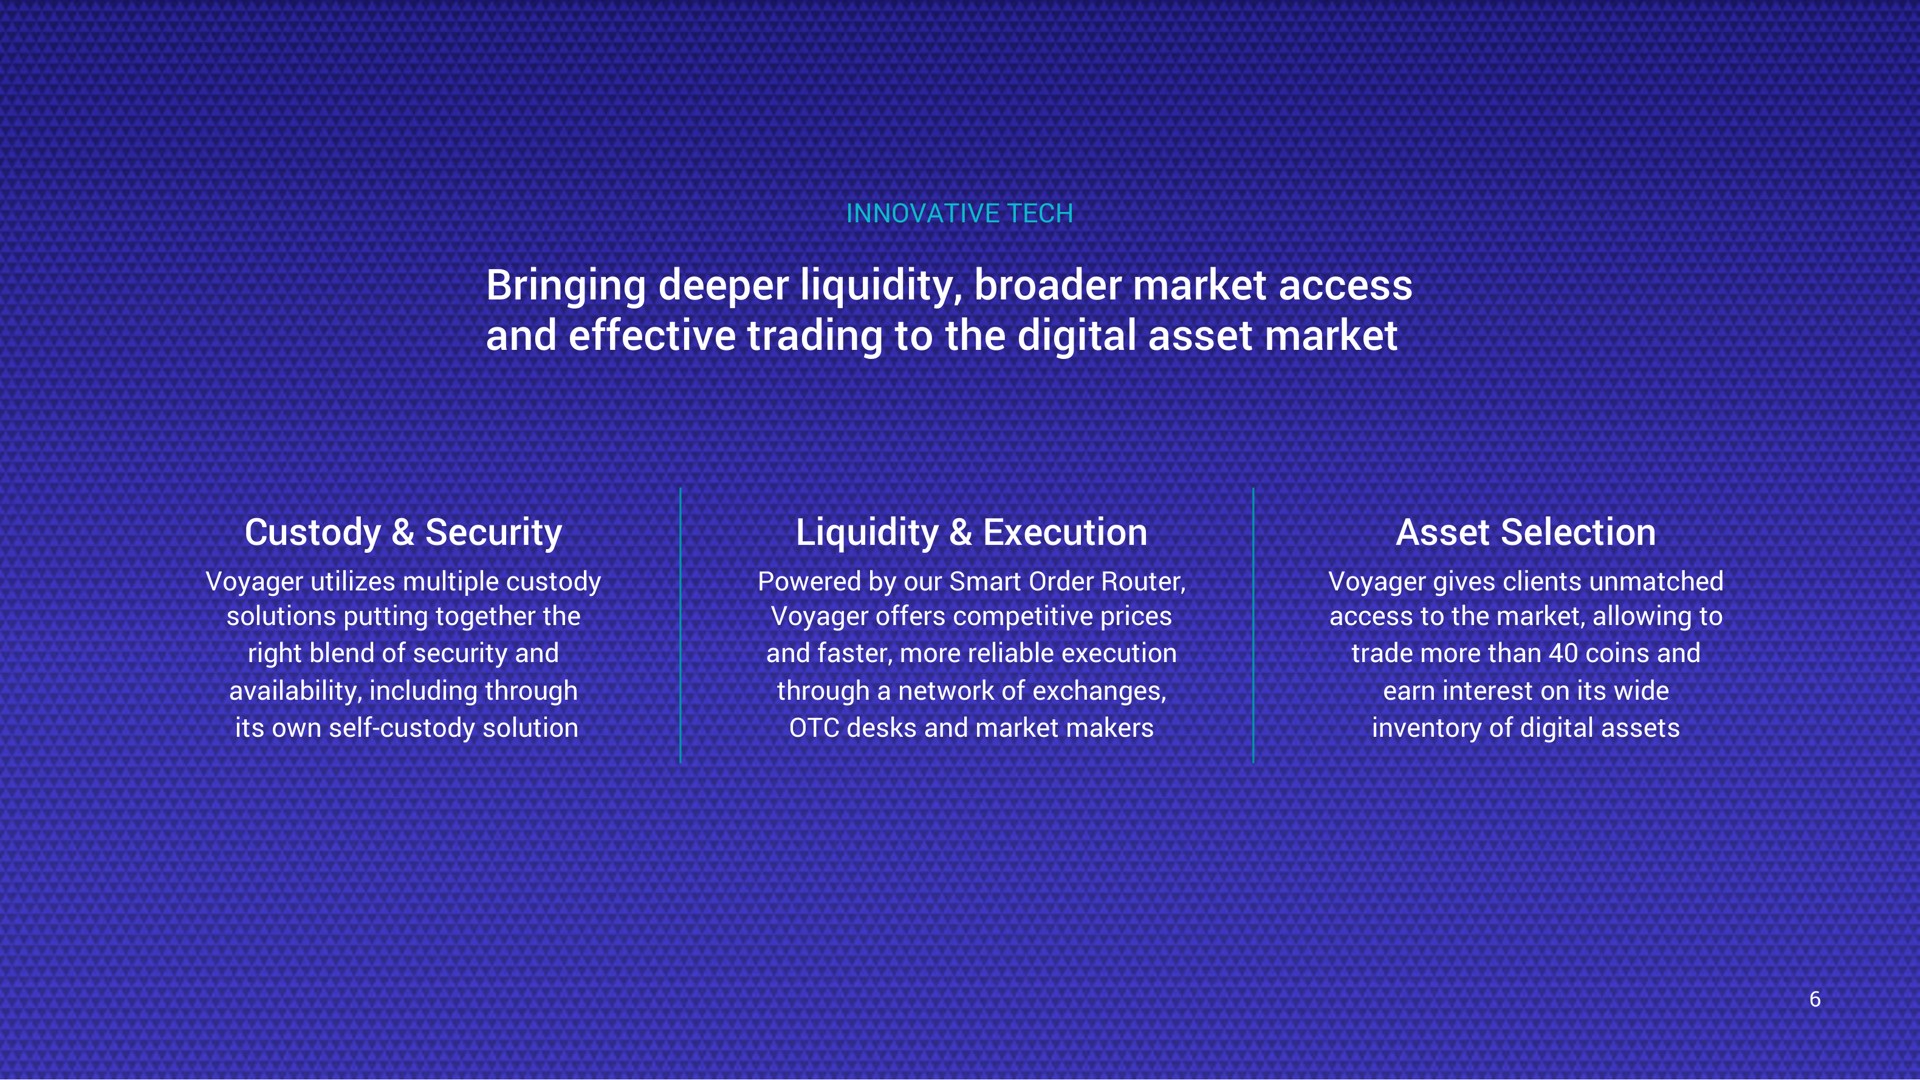 innovative tech bringing liquidity market access and effective trading to the digital asset market custody security voyager utilizes multiple custody solutions putting together the right blend of security and availability including through its own self custody solution liquidity execution powered by our smart order router voyager offers competitive prices and faster more reliable execution through a network of exchanges desks and market makers asset selection voyager gives clients unmatched access to the market allowing to trade more than coins and earn interest on its wide inventory of digital assets | Voyager Digital